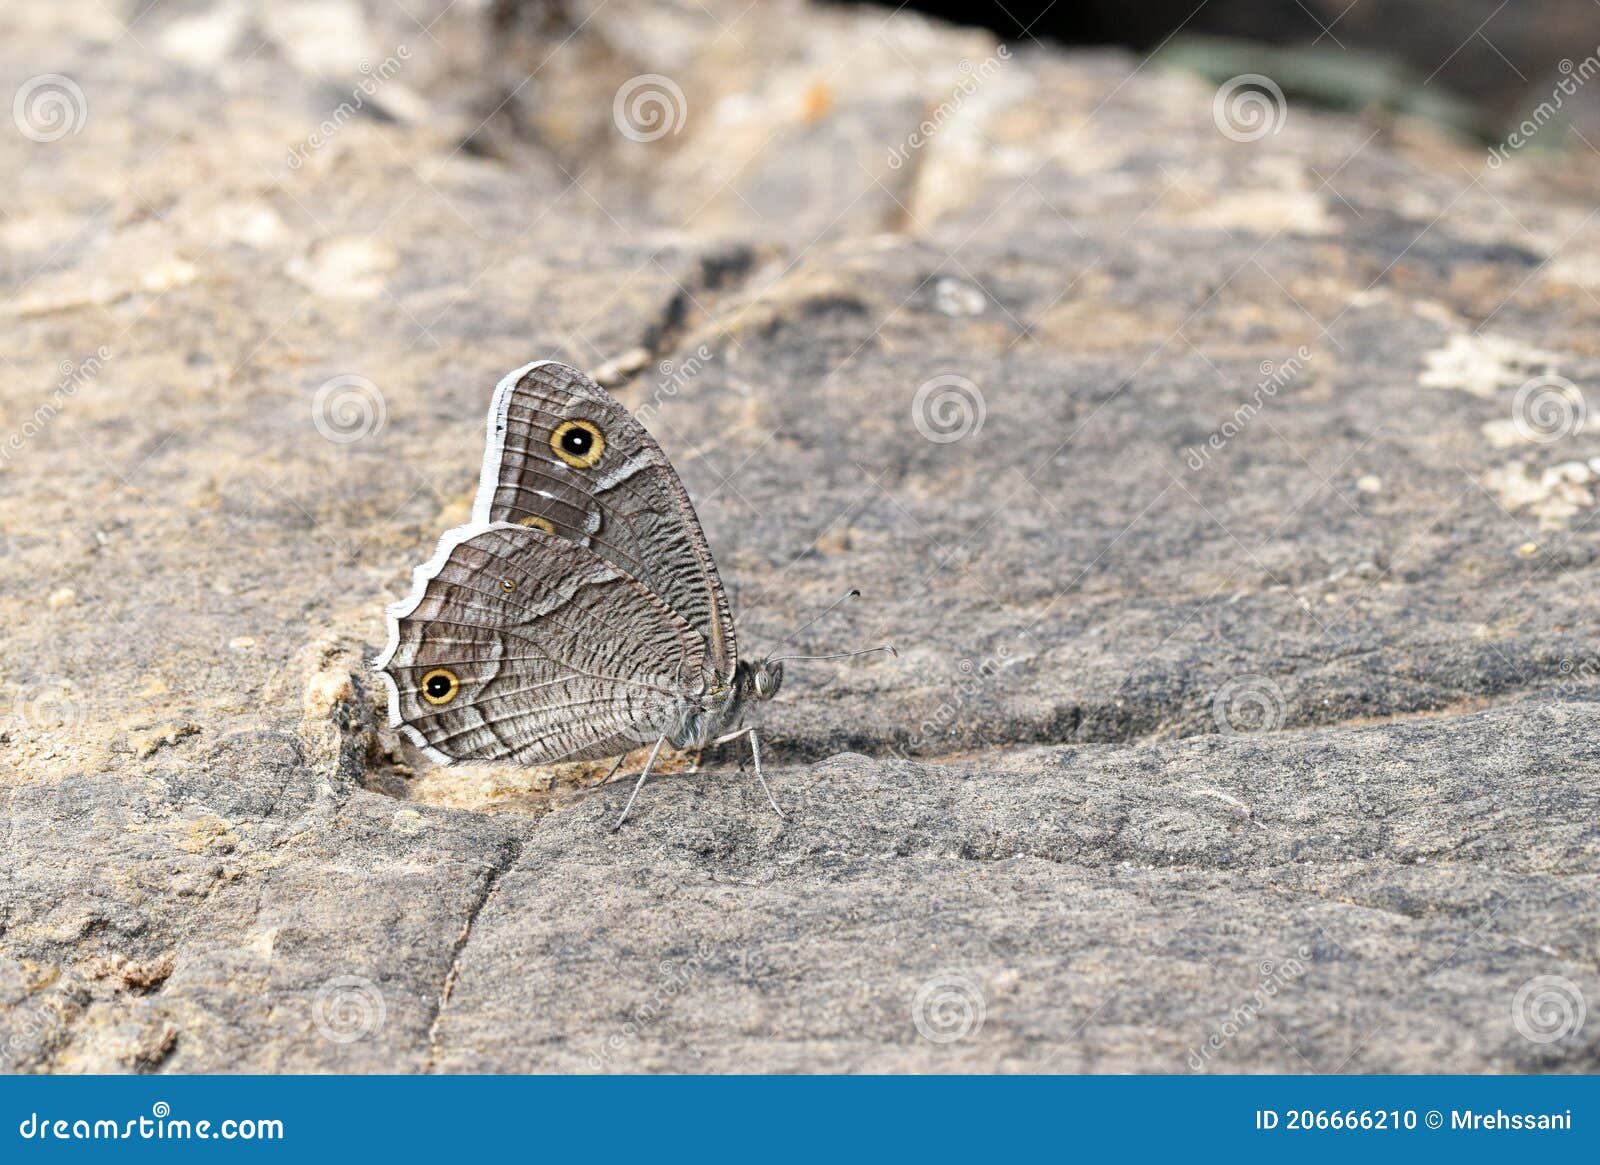 hipparchia parisatis, the white-edged rock brown butterfly